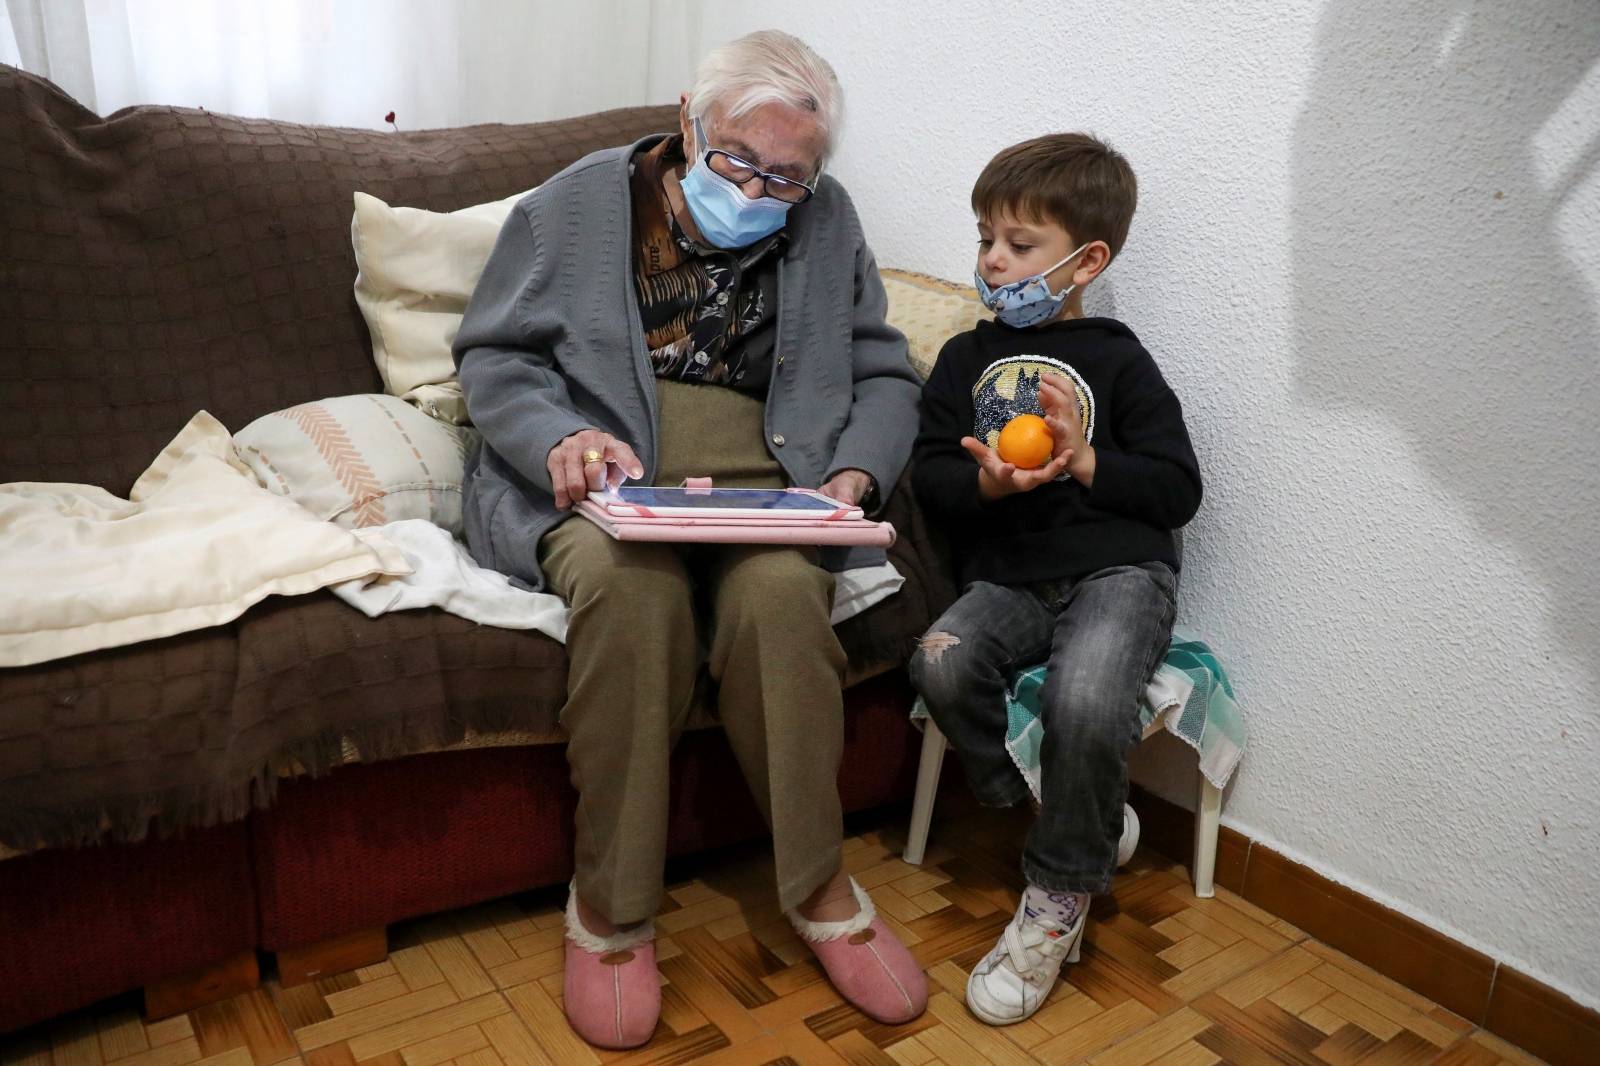 Florentina Martin, a 99 year-old woman who survived coronavirus disease (COVID-19), plays a digital puzzle with her great-grandson Pedro Valle at her home in Pinto